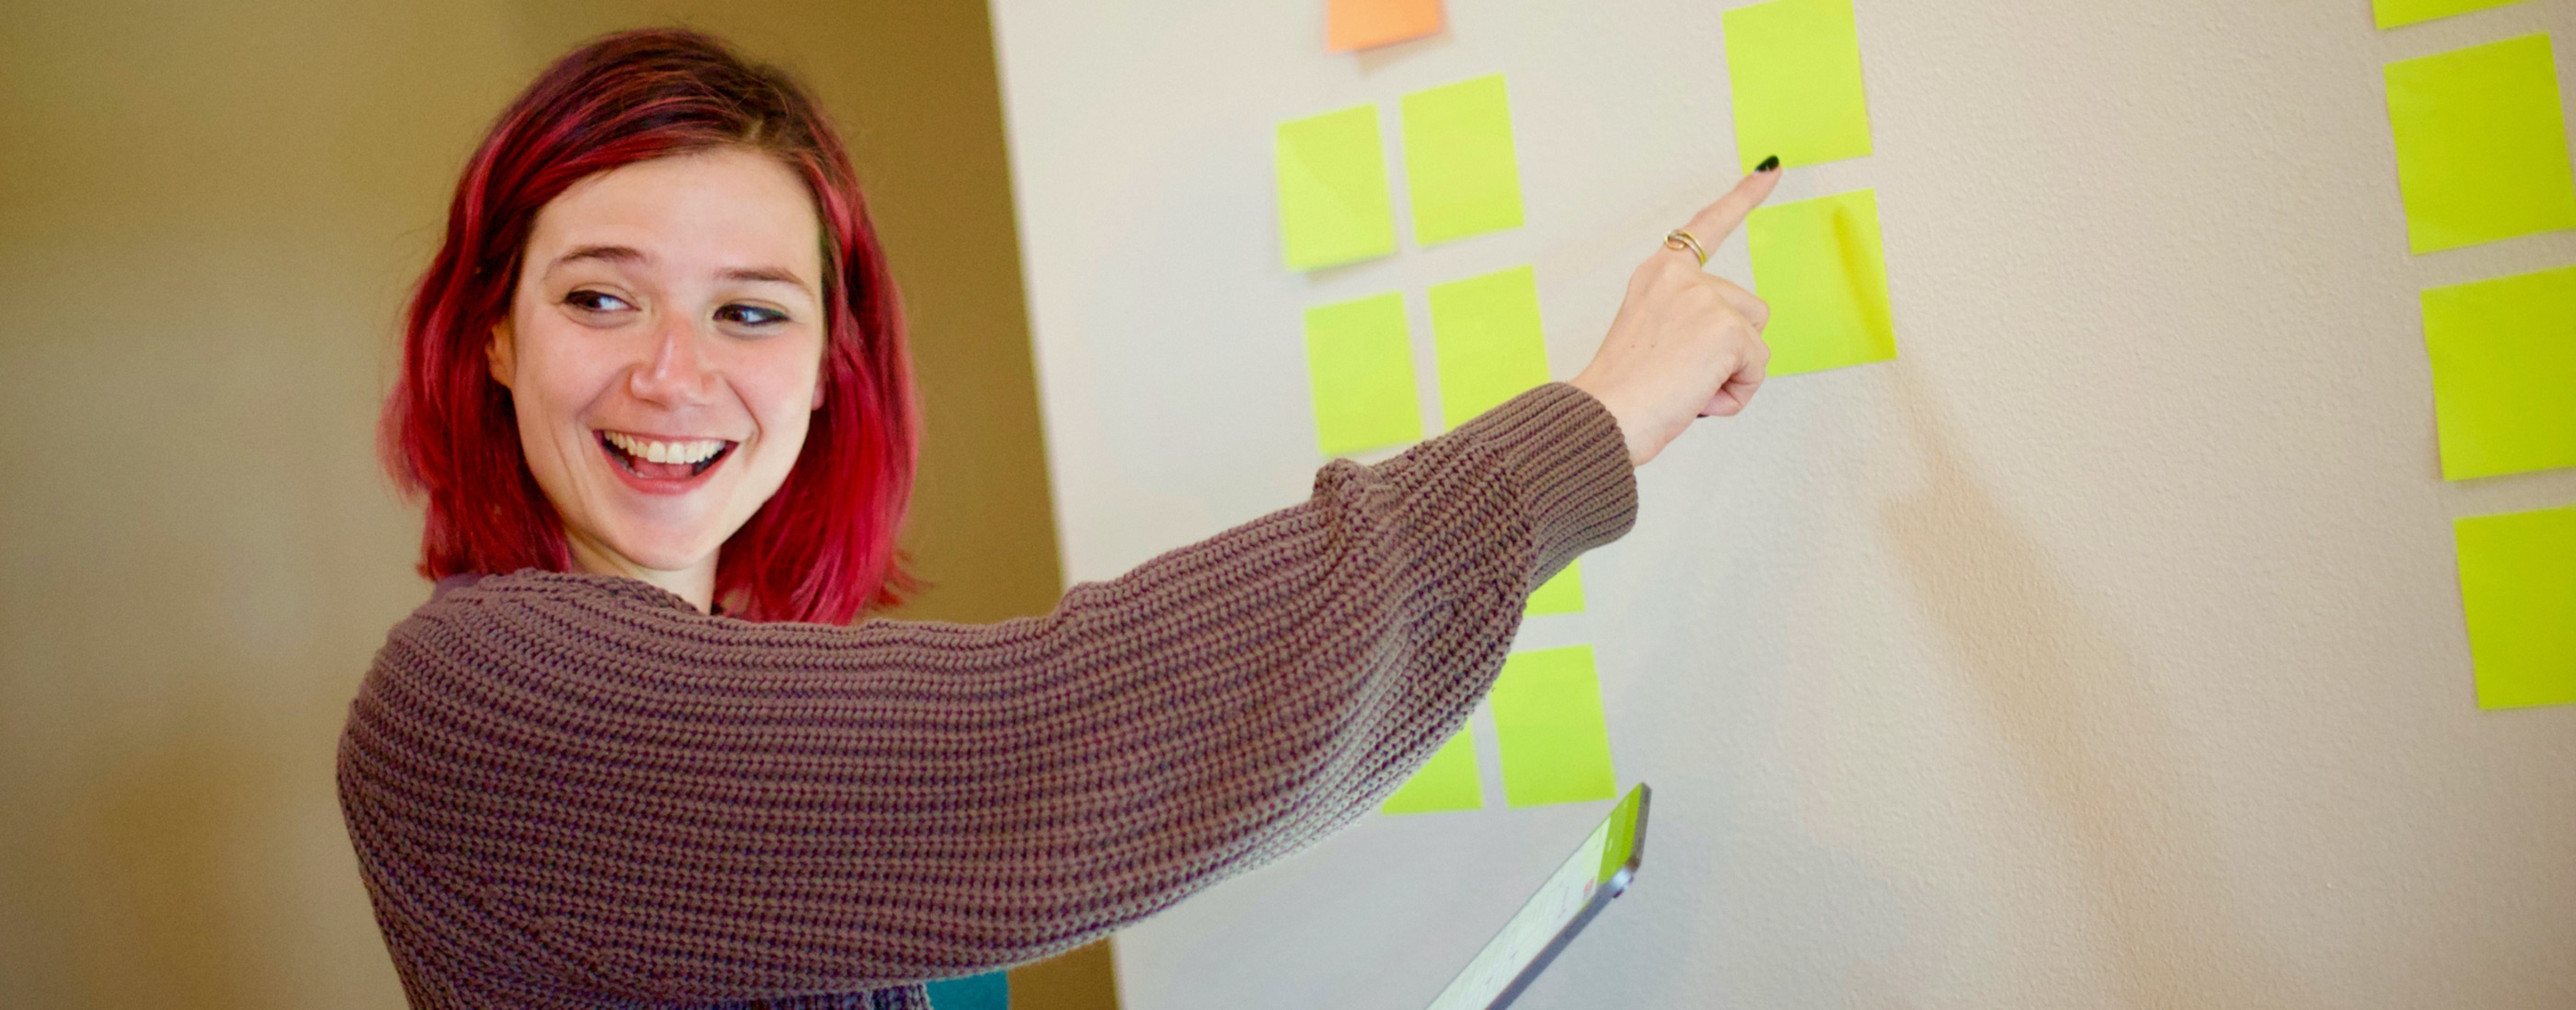 Lady with bright red hair smiling and pointing to a white board with post-it notes on it